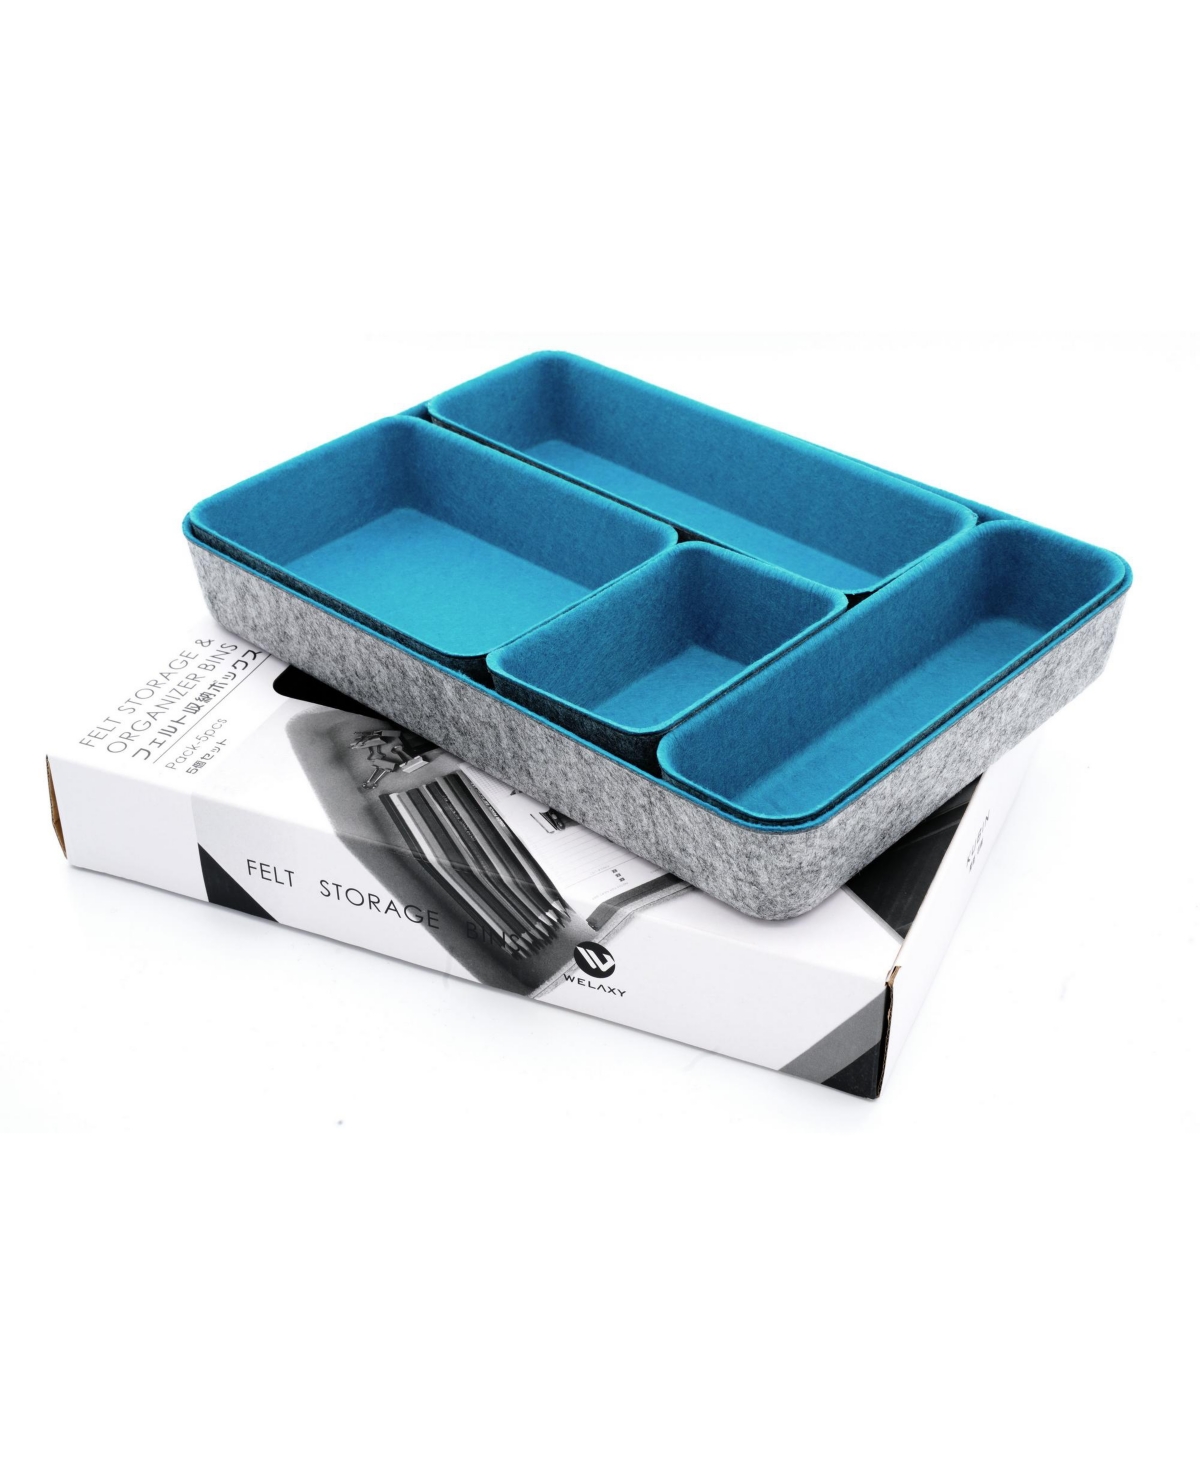 Welaxy Felt 5 Piece Desk And Drawer Organizer Tray Set In Turquoise